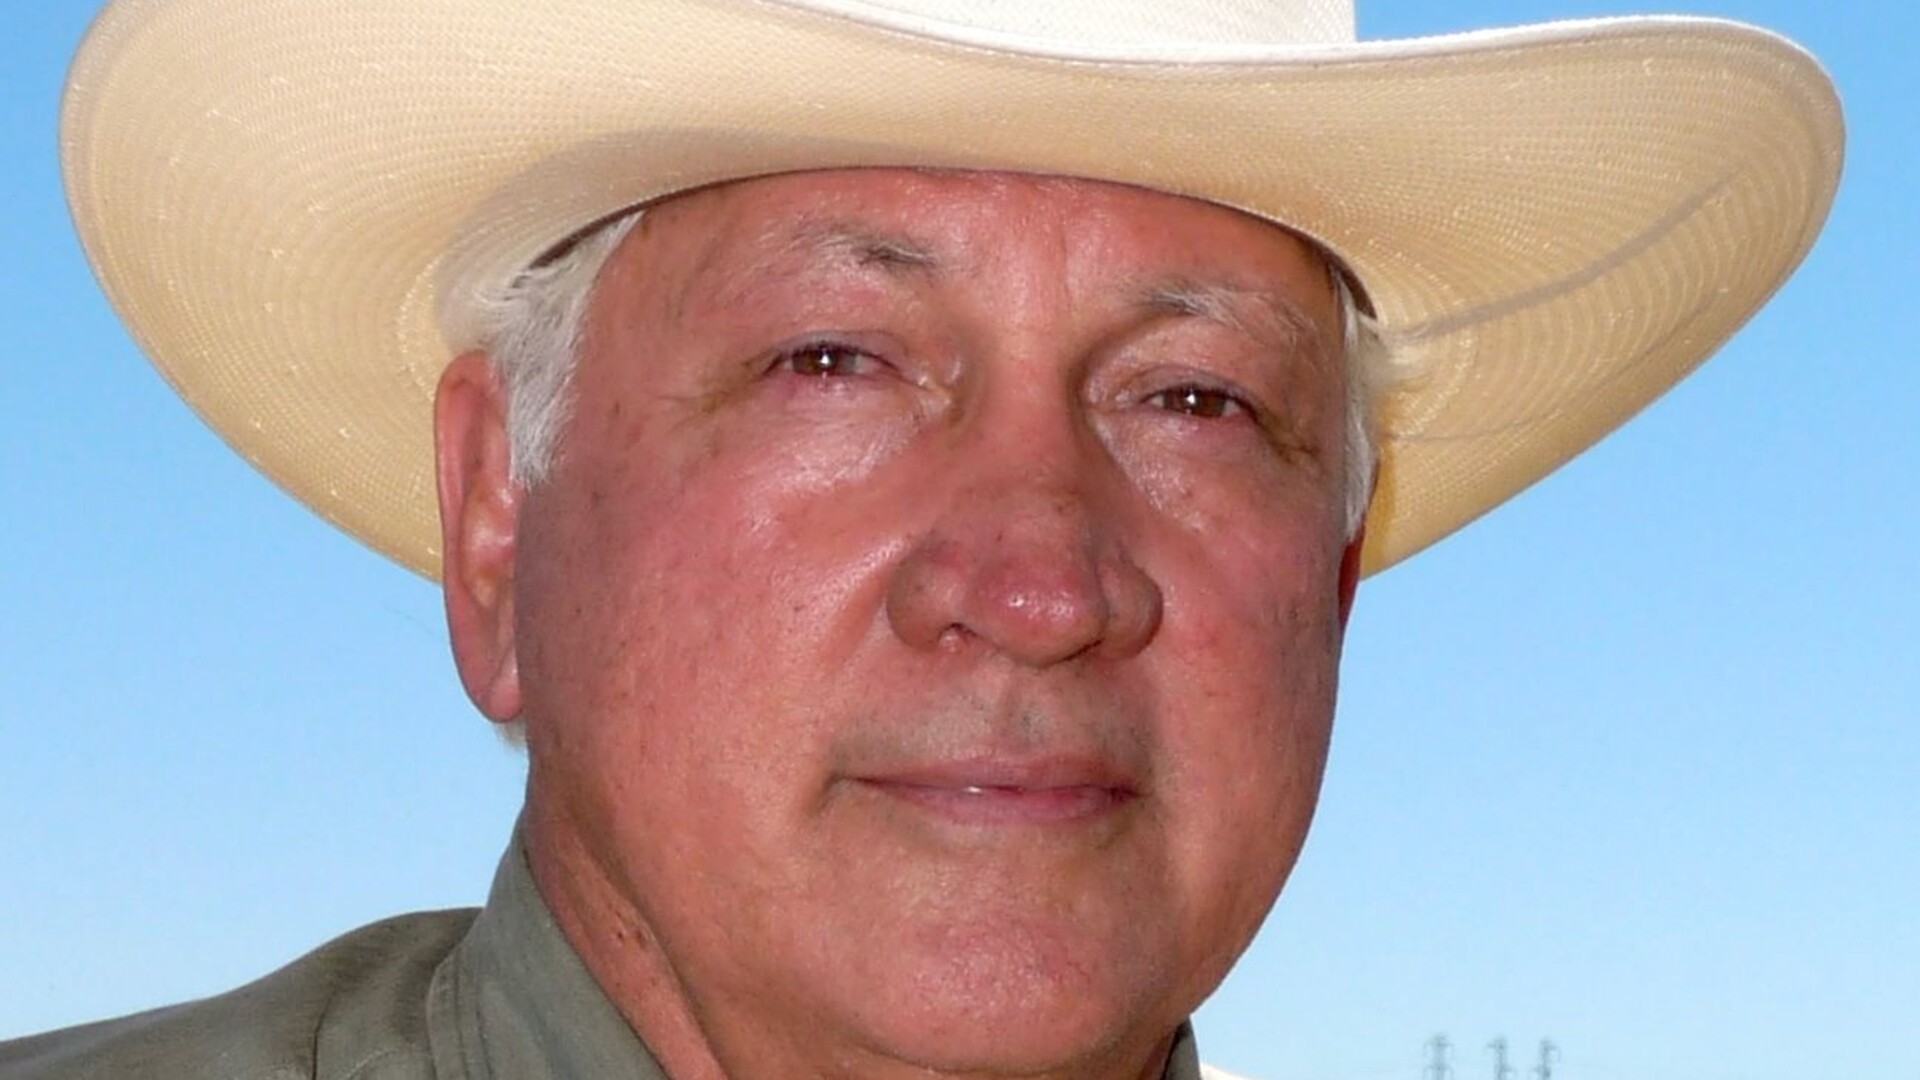 Joe Del Bosque: Farmers Selling Out, State Wants Land for Water Rights